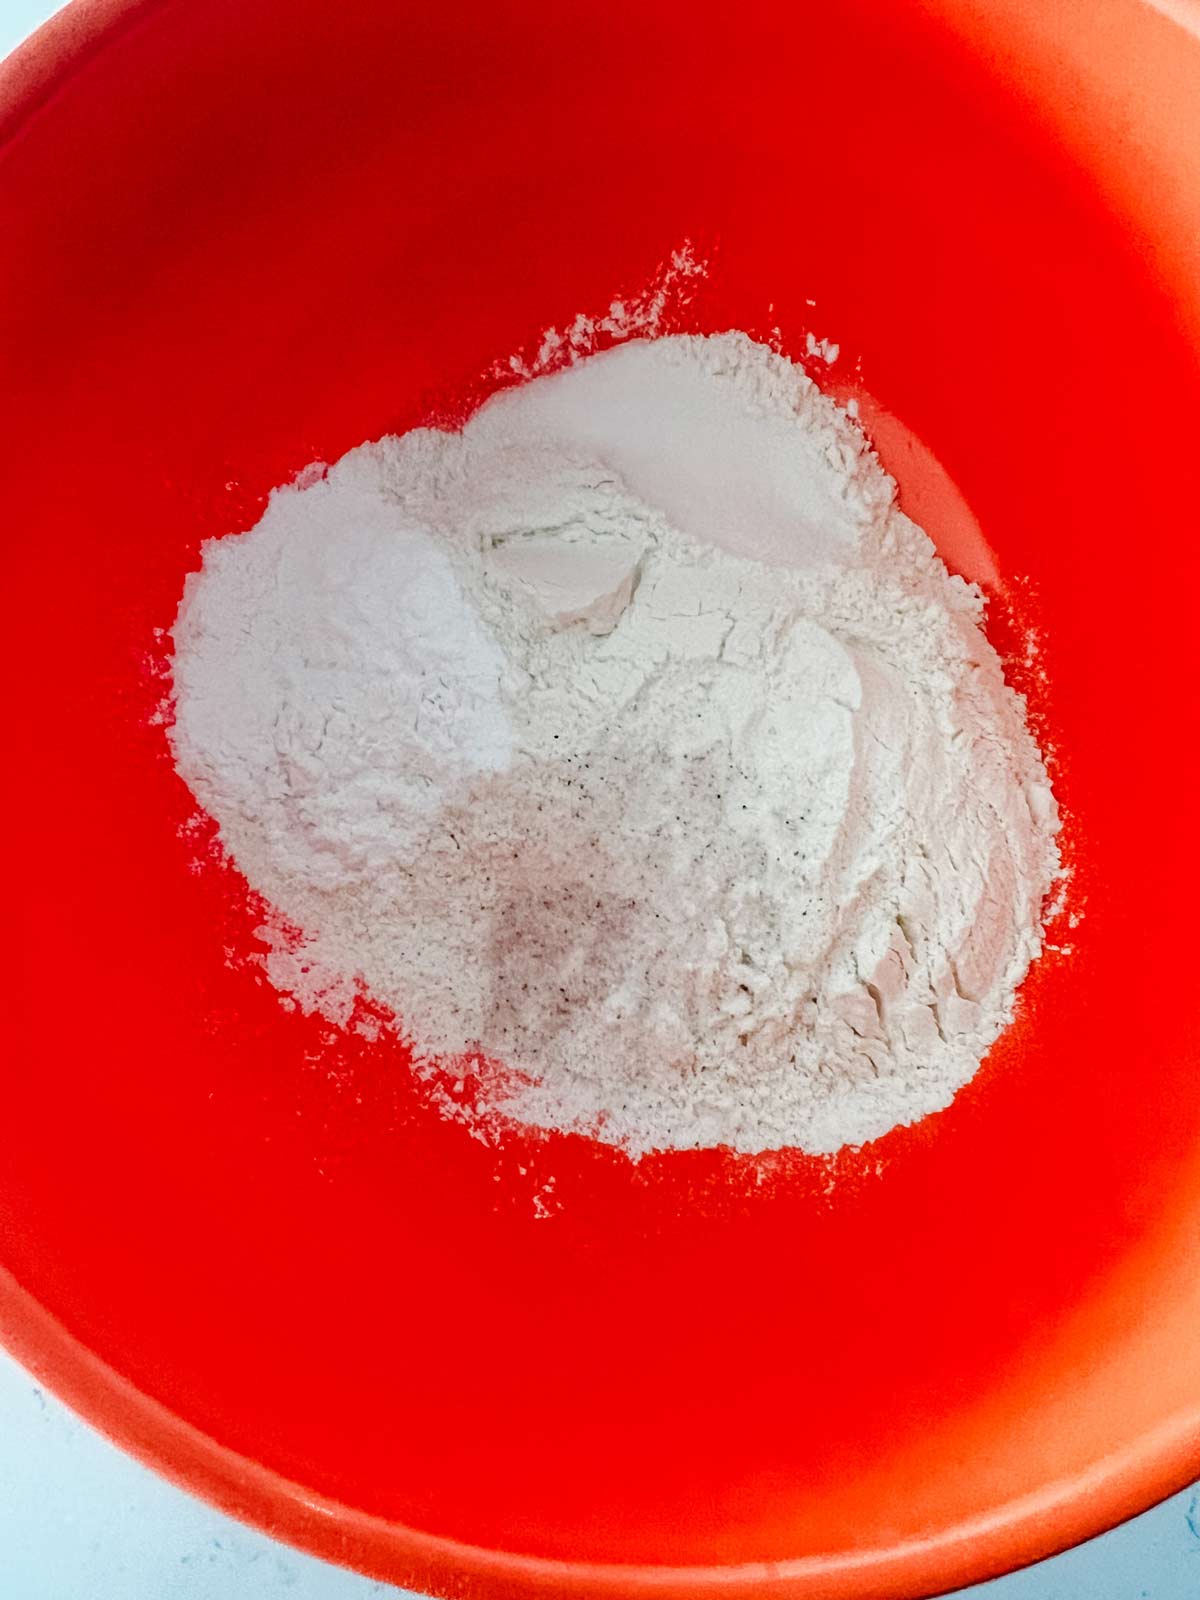 Flour and baking soda in a large orange bowl.